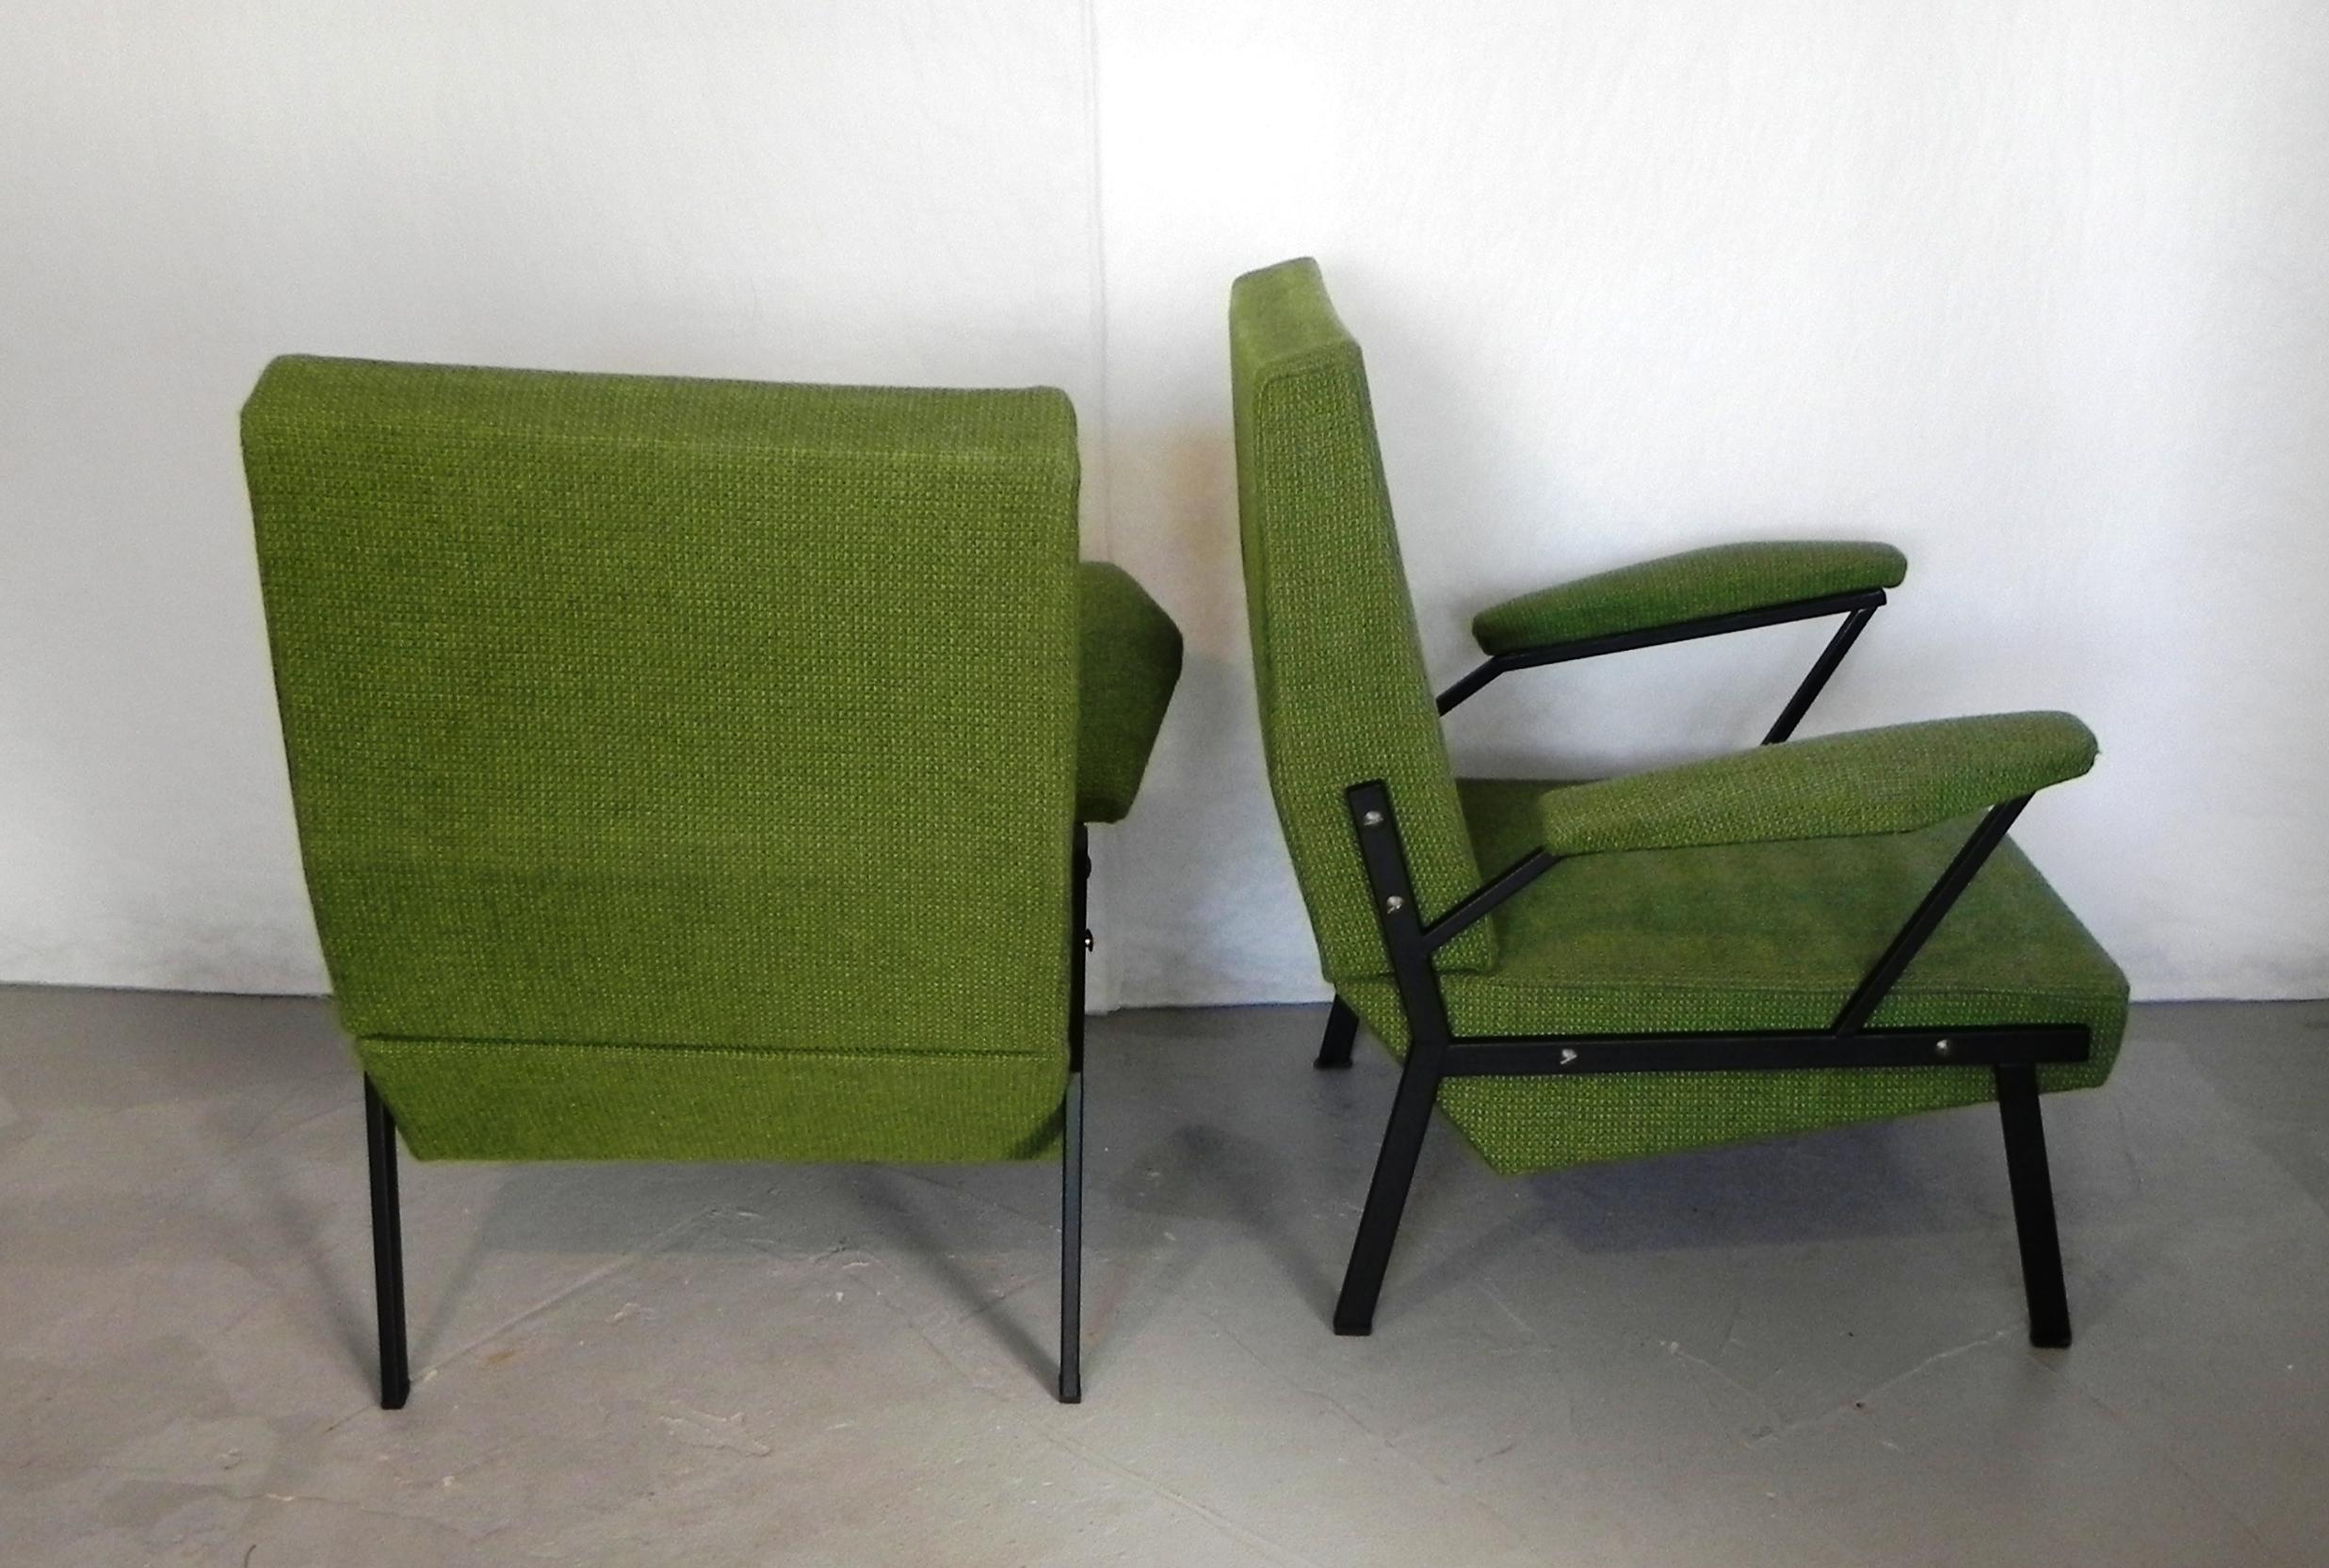 2 armchairs from the 1960s 1